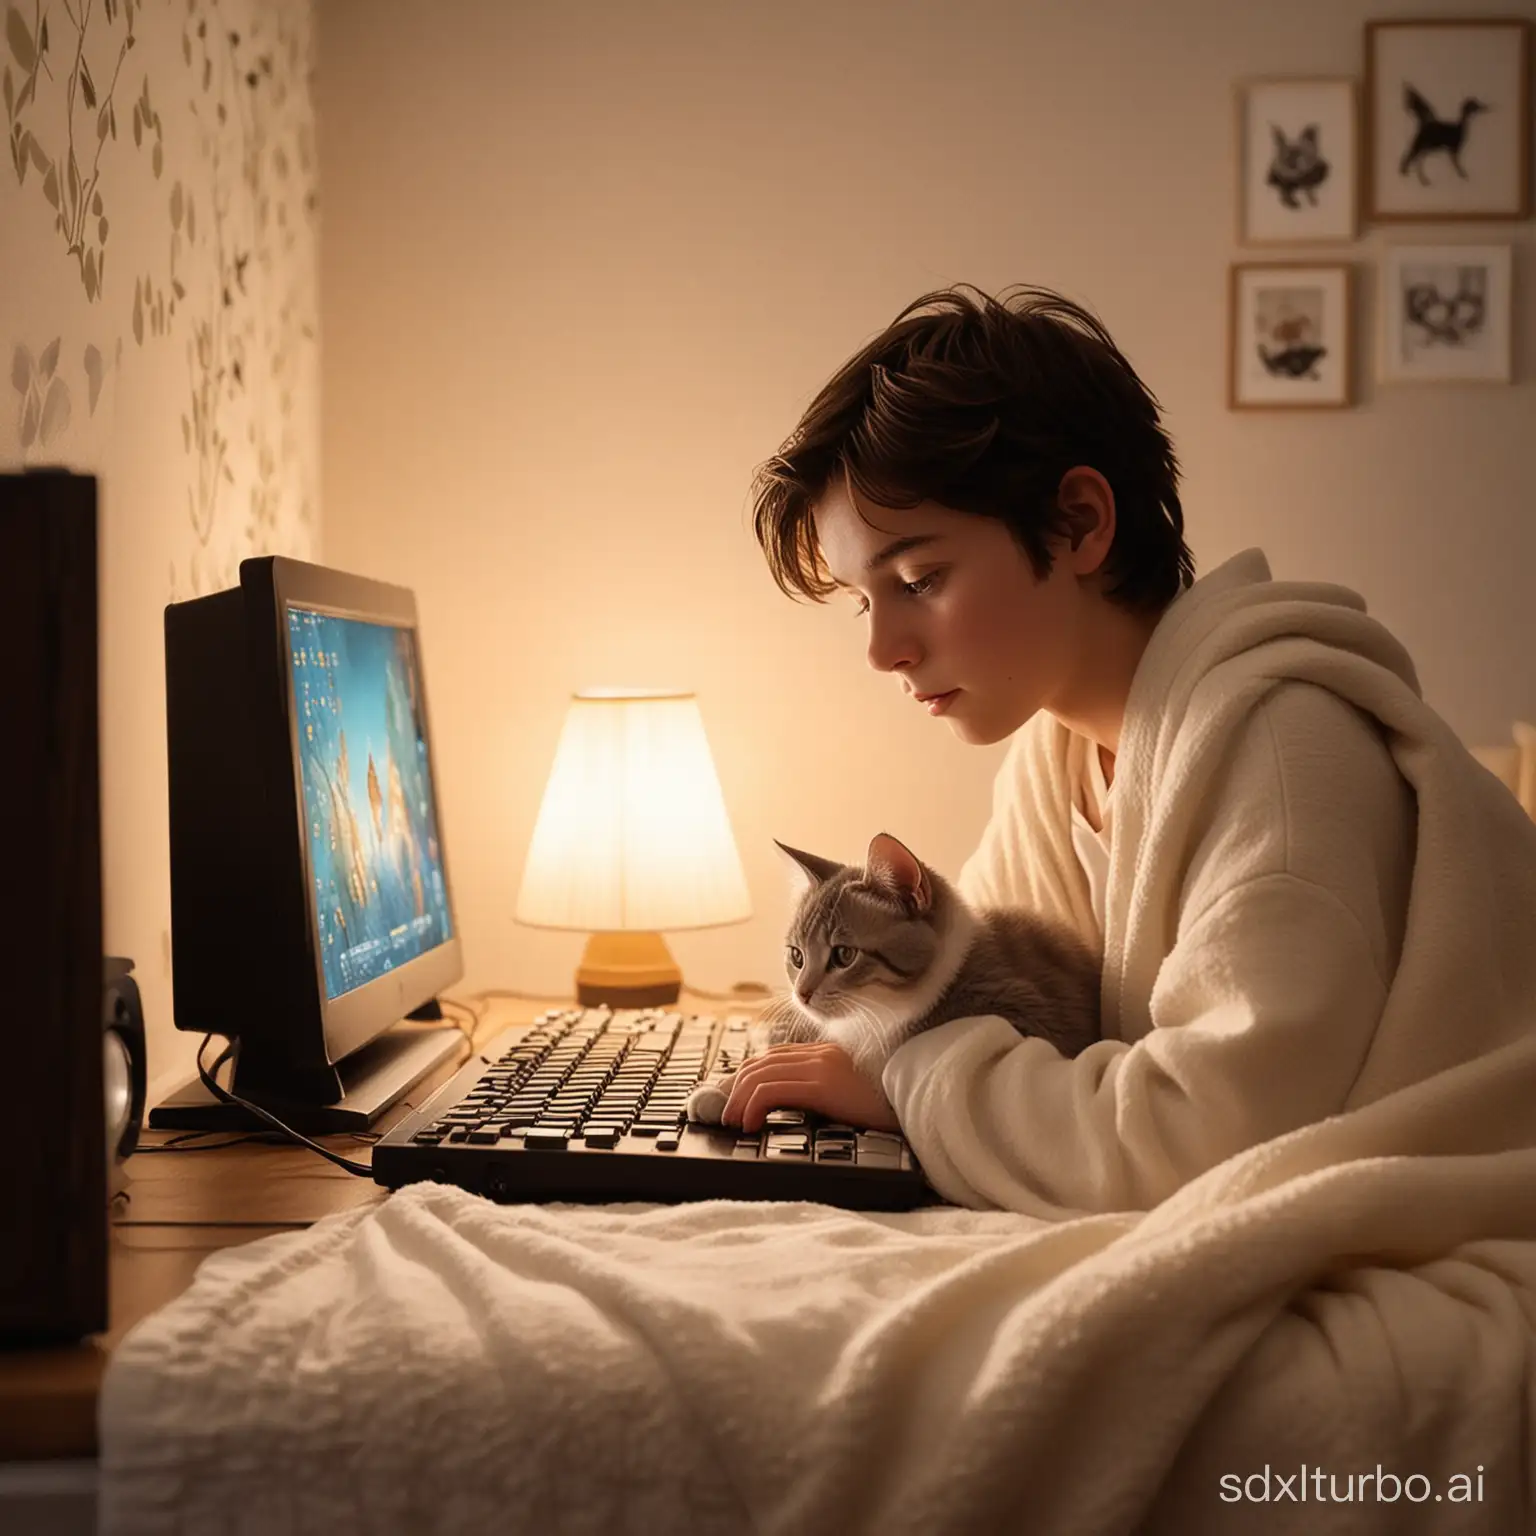 In this cozy scene, a young boy sits beneath the soft glow of a lamp, his eyes intently fixed on the computer screen as his fingers dance deftly across the keyboard. A plush blanket is casually draped over his shoulders, as if a warm embrace enfolds him. Beside him, a languid cat is curled up, sound asleep, its breathing steady and deep, perhaps chasing butterflies in its dreams. The room is filled with the sounds of the video game and the gentle rustling of the wind outside, creating a tranquil and comfortable domestic tableau.